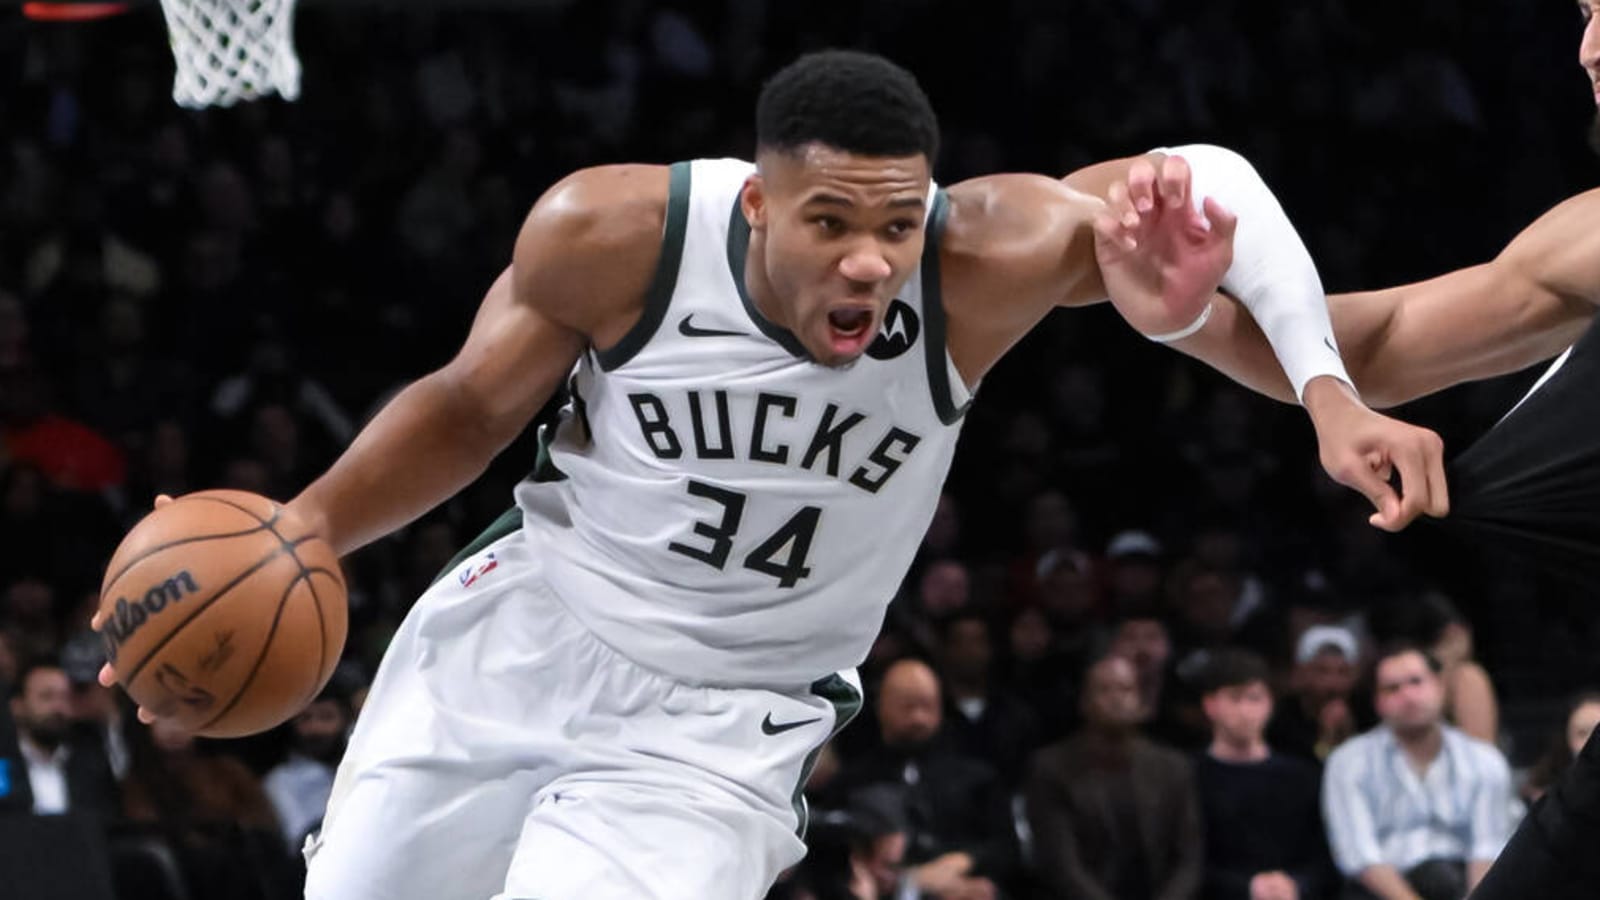 The Bucks are a reckless, glorious drama in Giannis' image